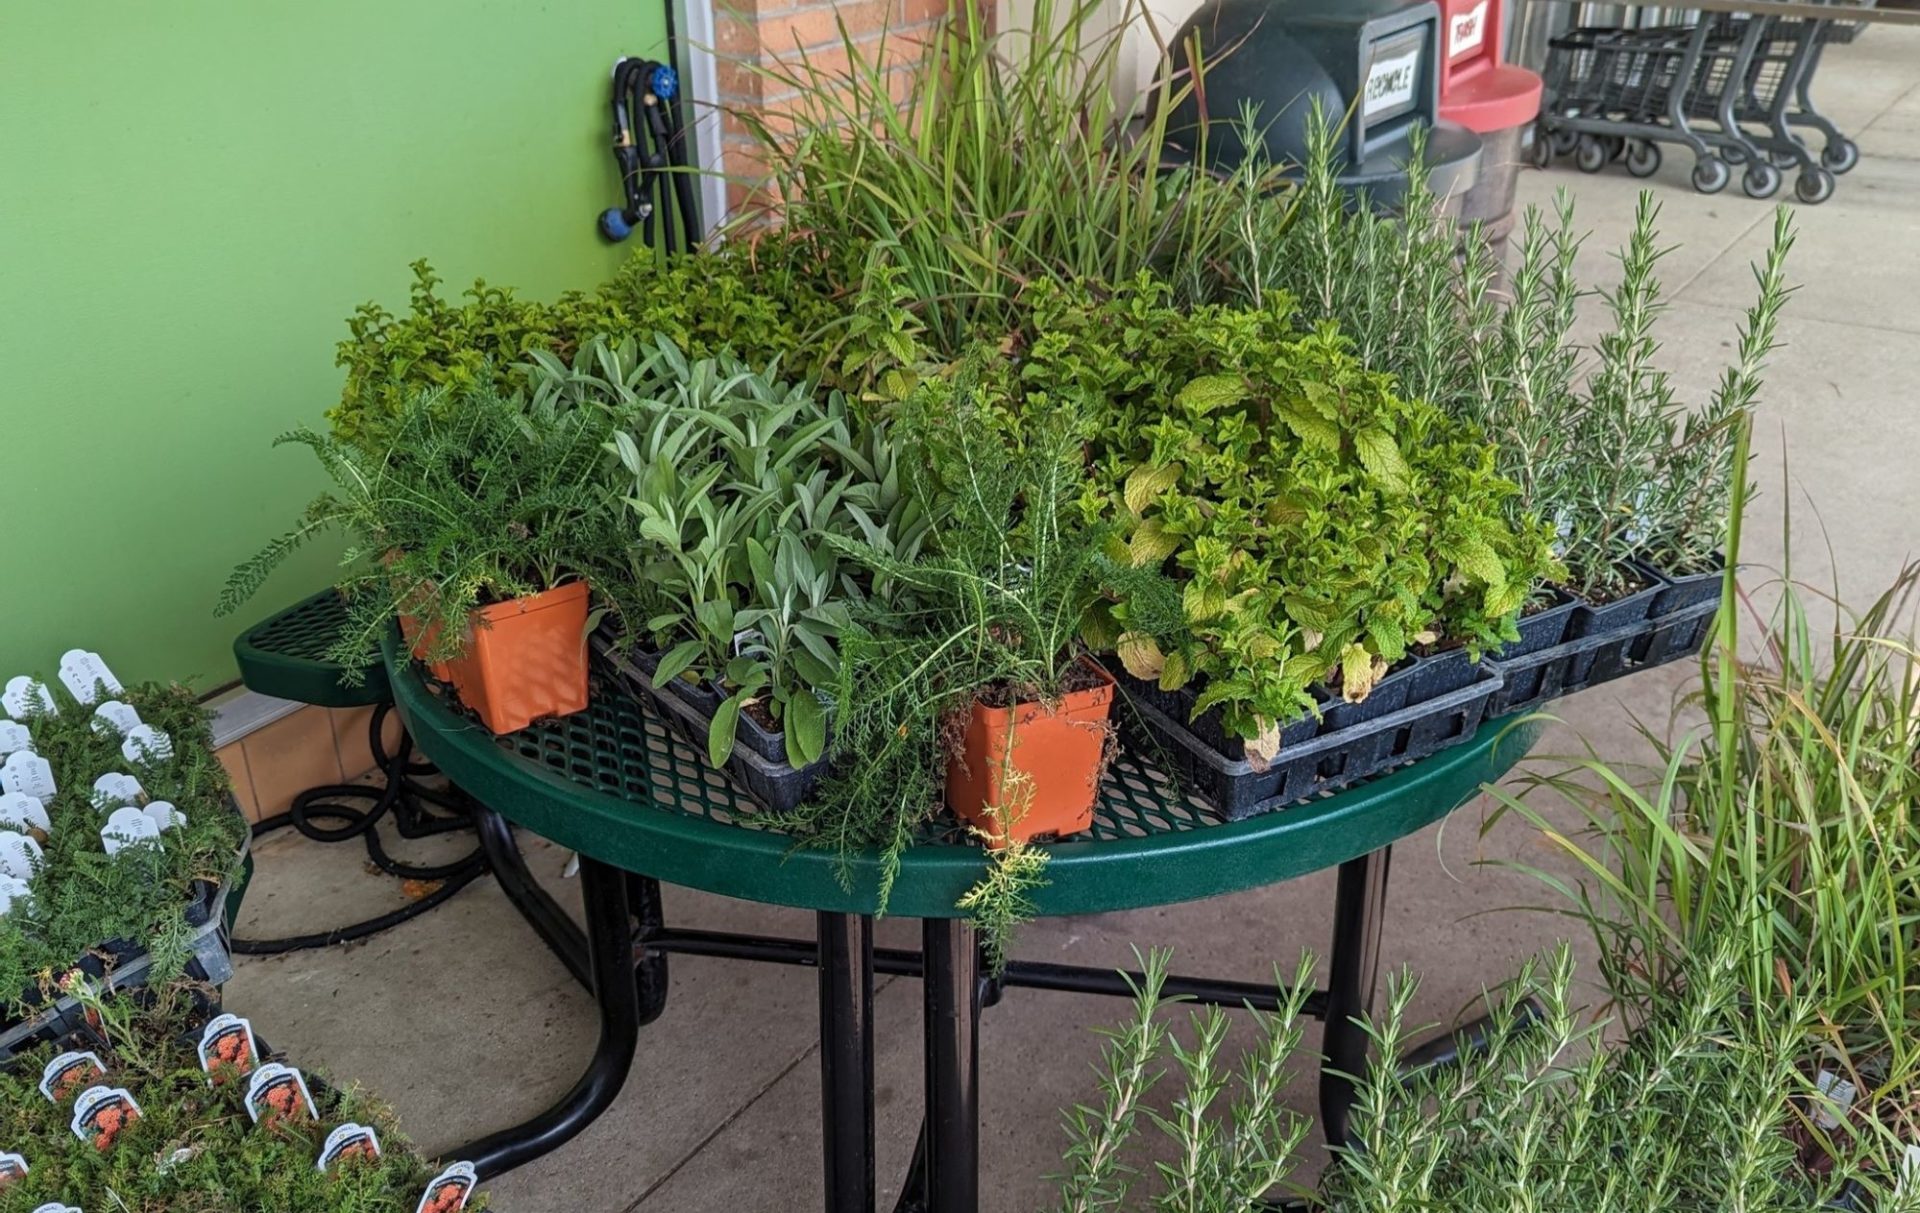 A collection of herb seedlings are sitting on a green table on a concrete patio. There are also herbs on the ground surrounding the table.